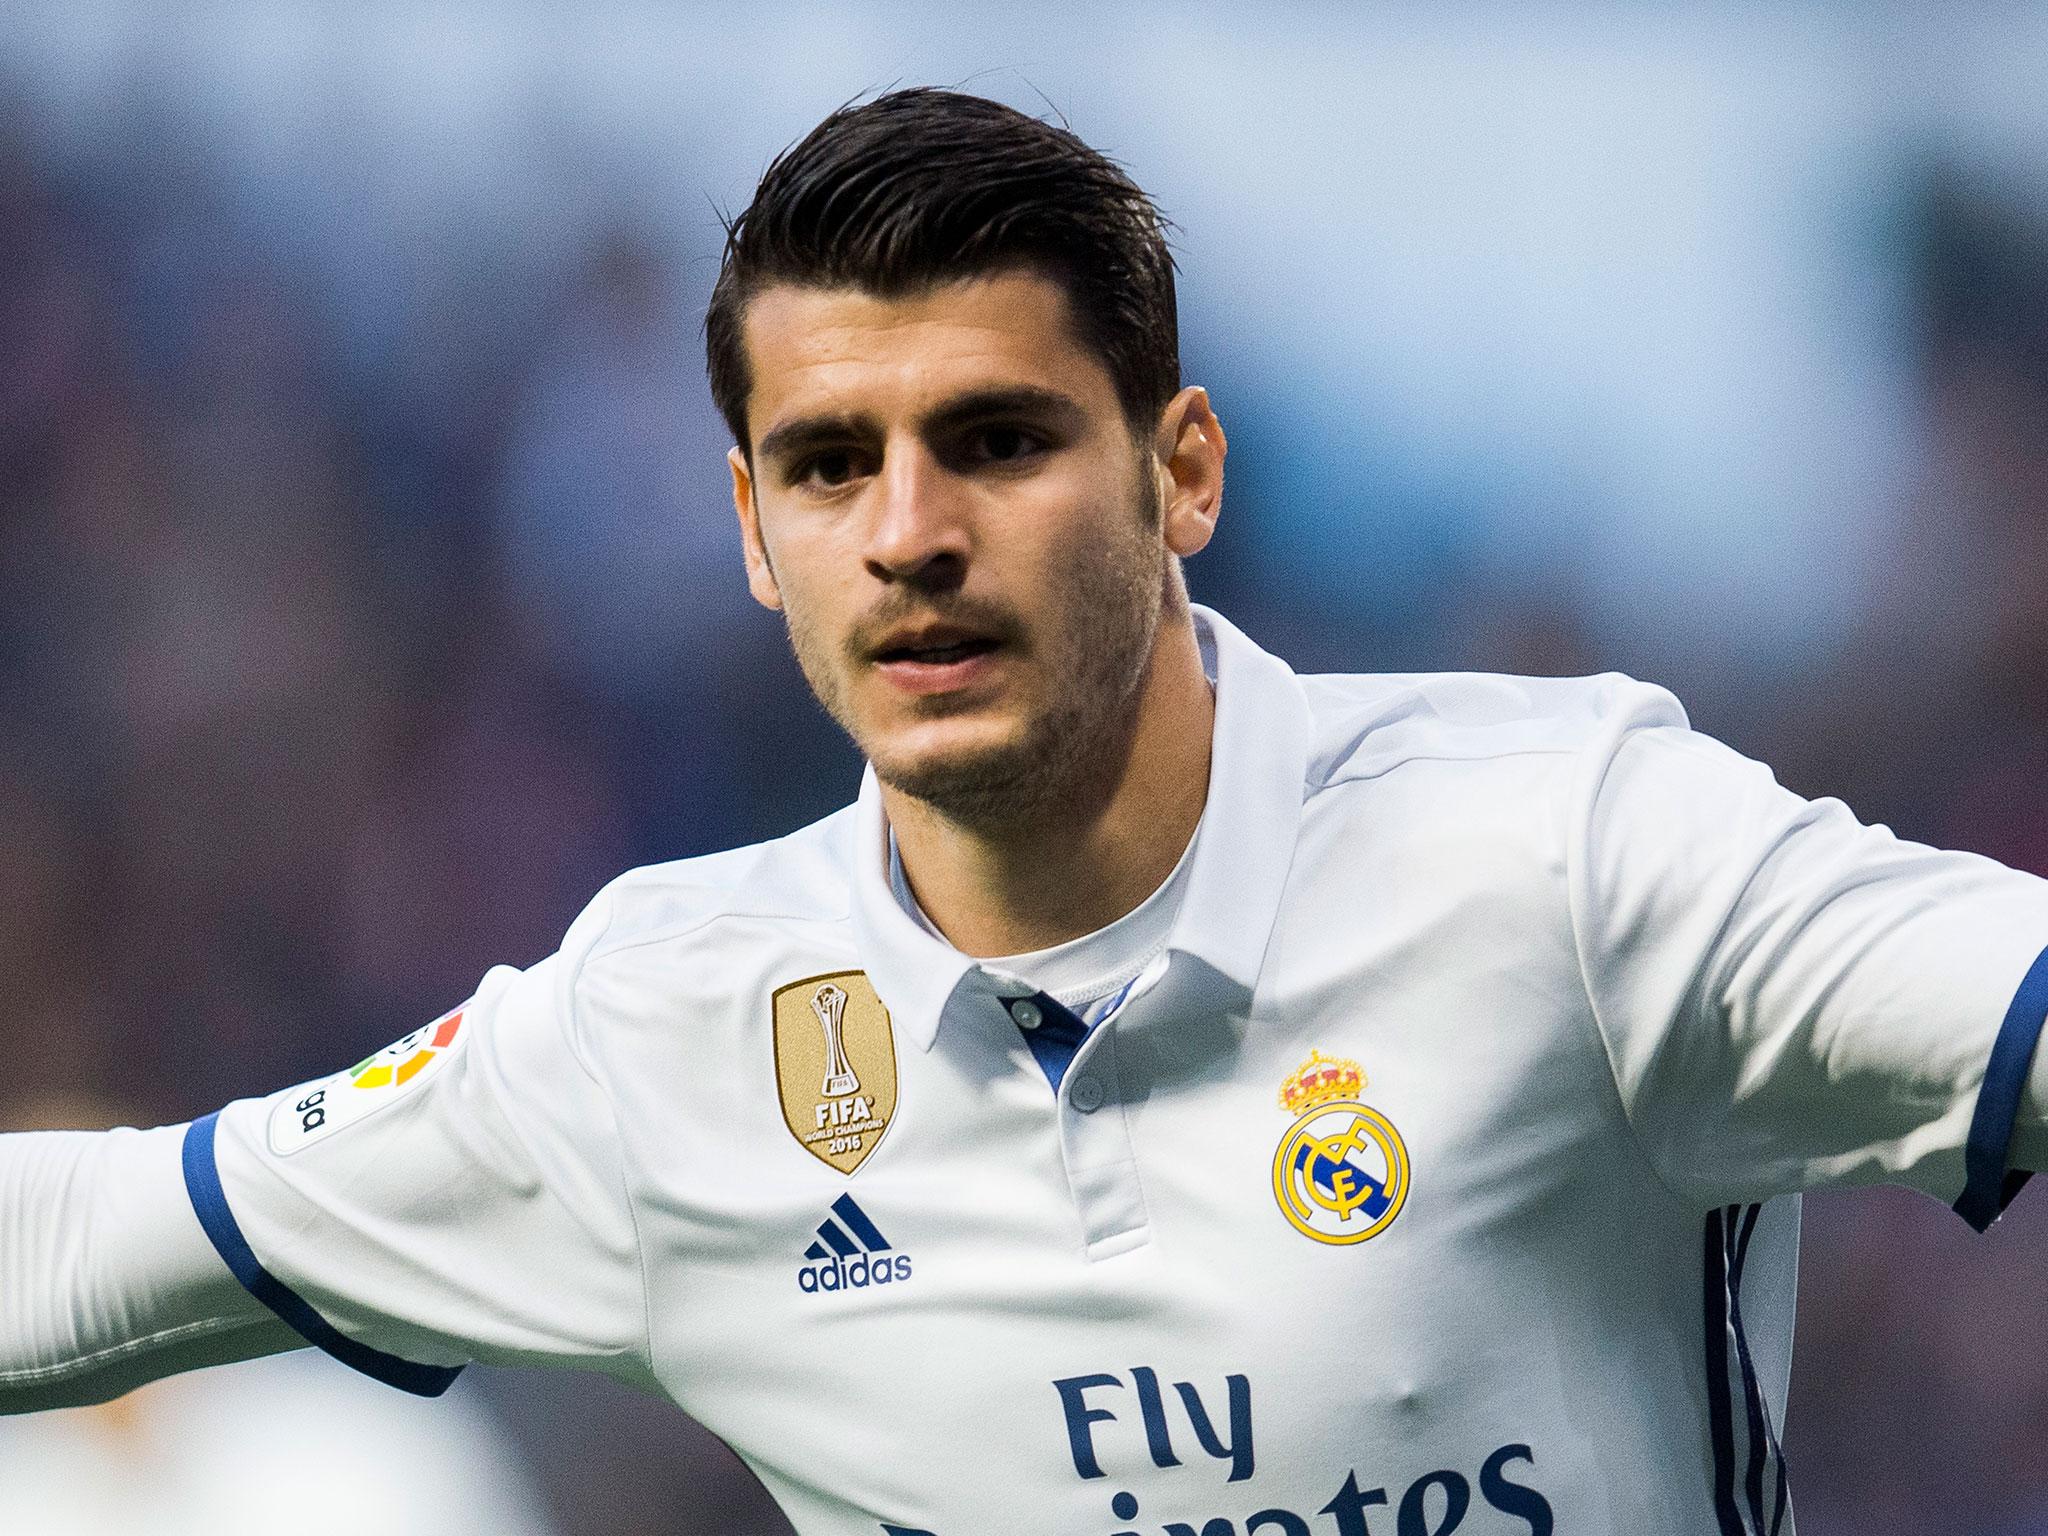 Morata has decided to leave Real Madrid and United remain confident